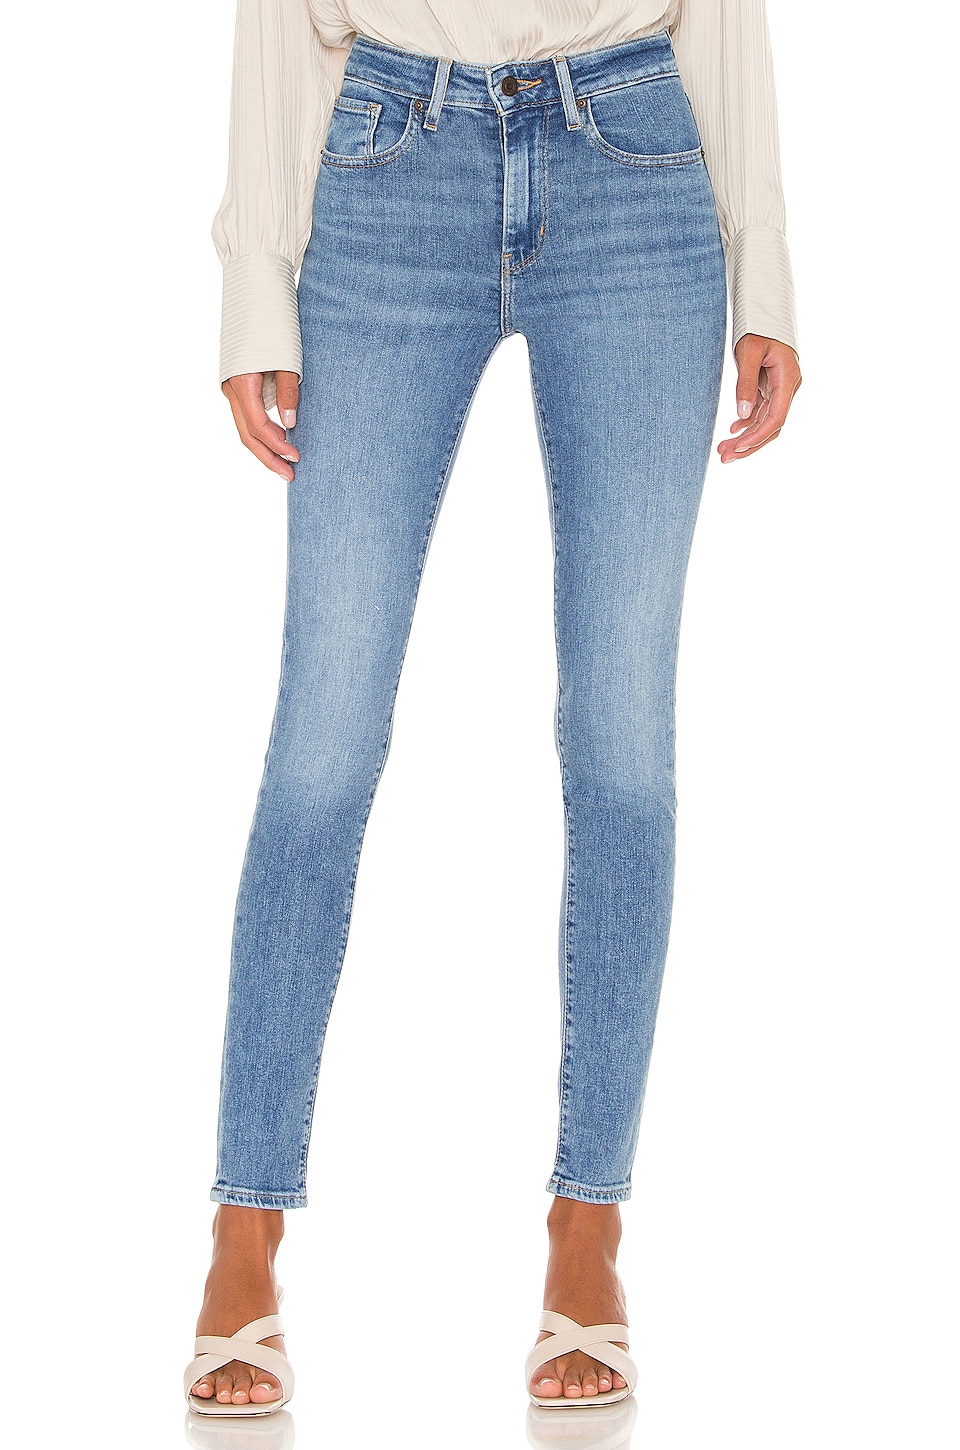 LEVI'S 721 High Rise Skinny Jean in Don't Be Extra | REVOLVE